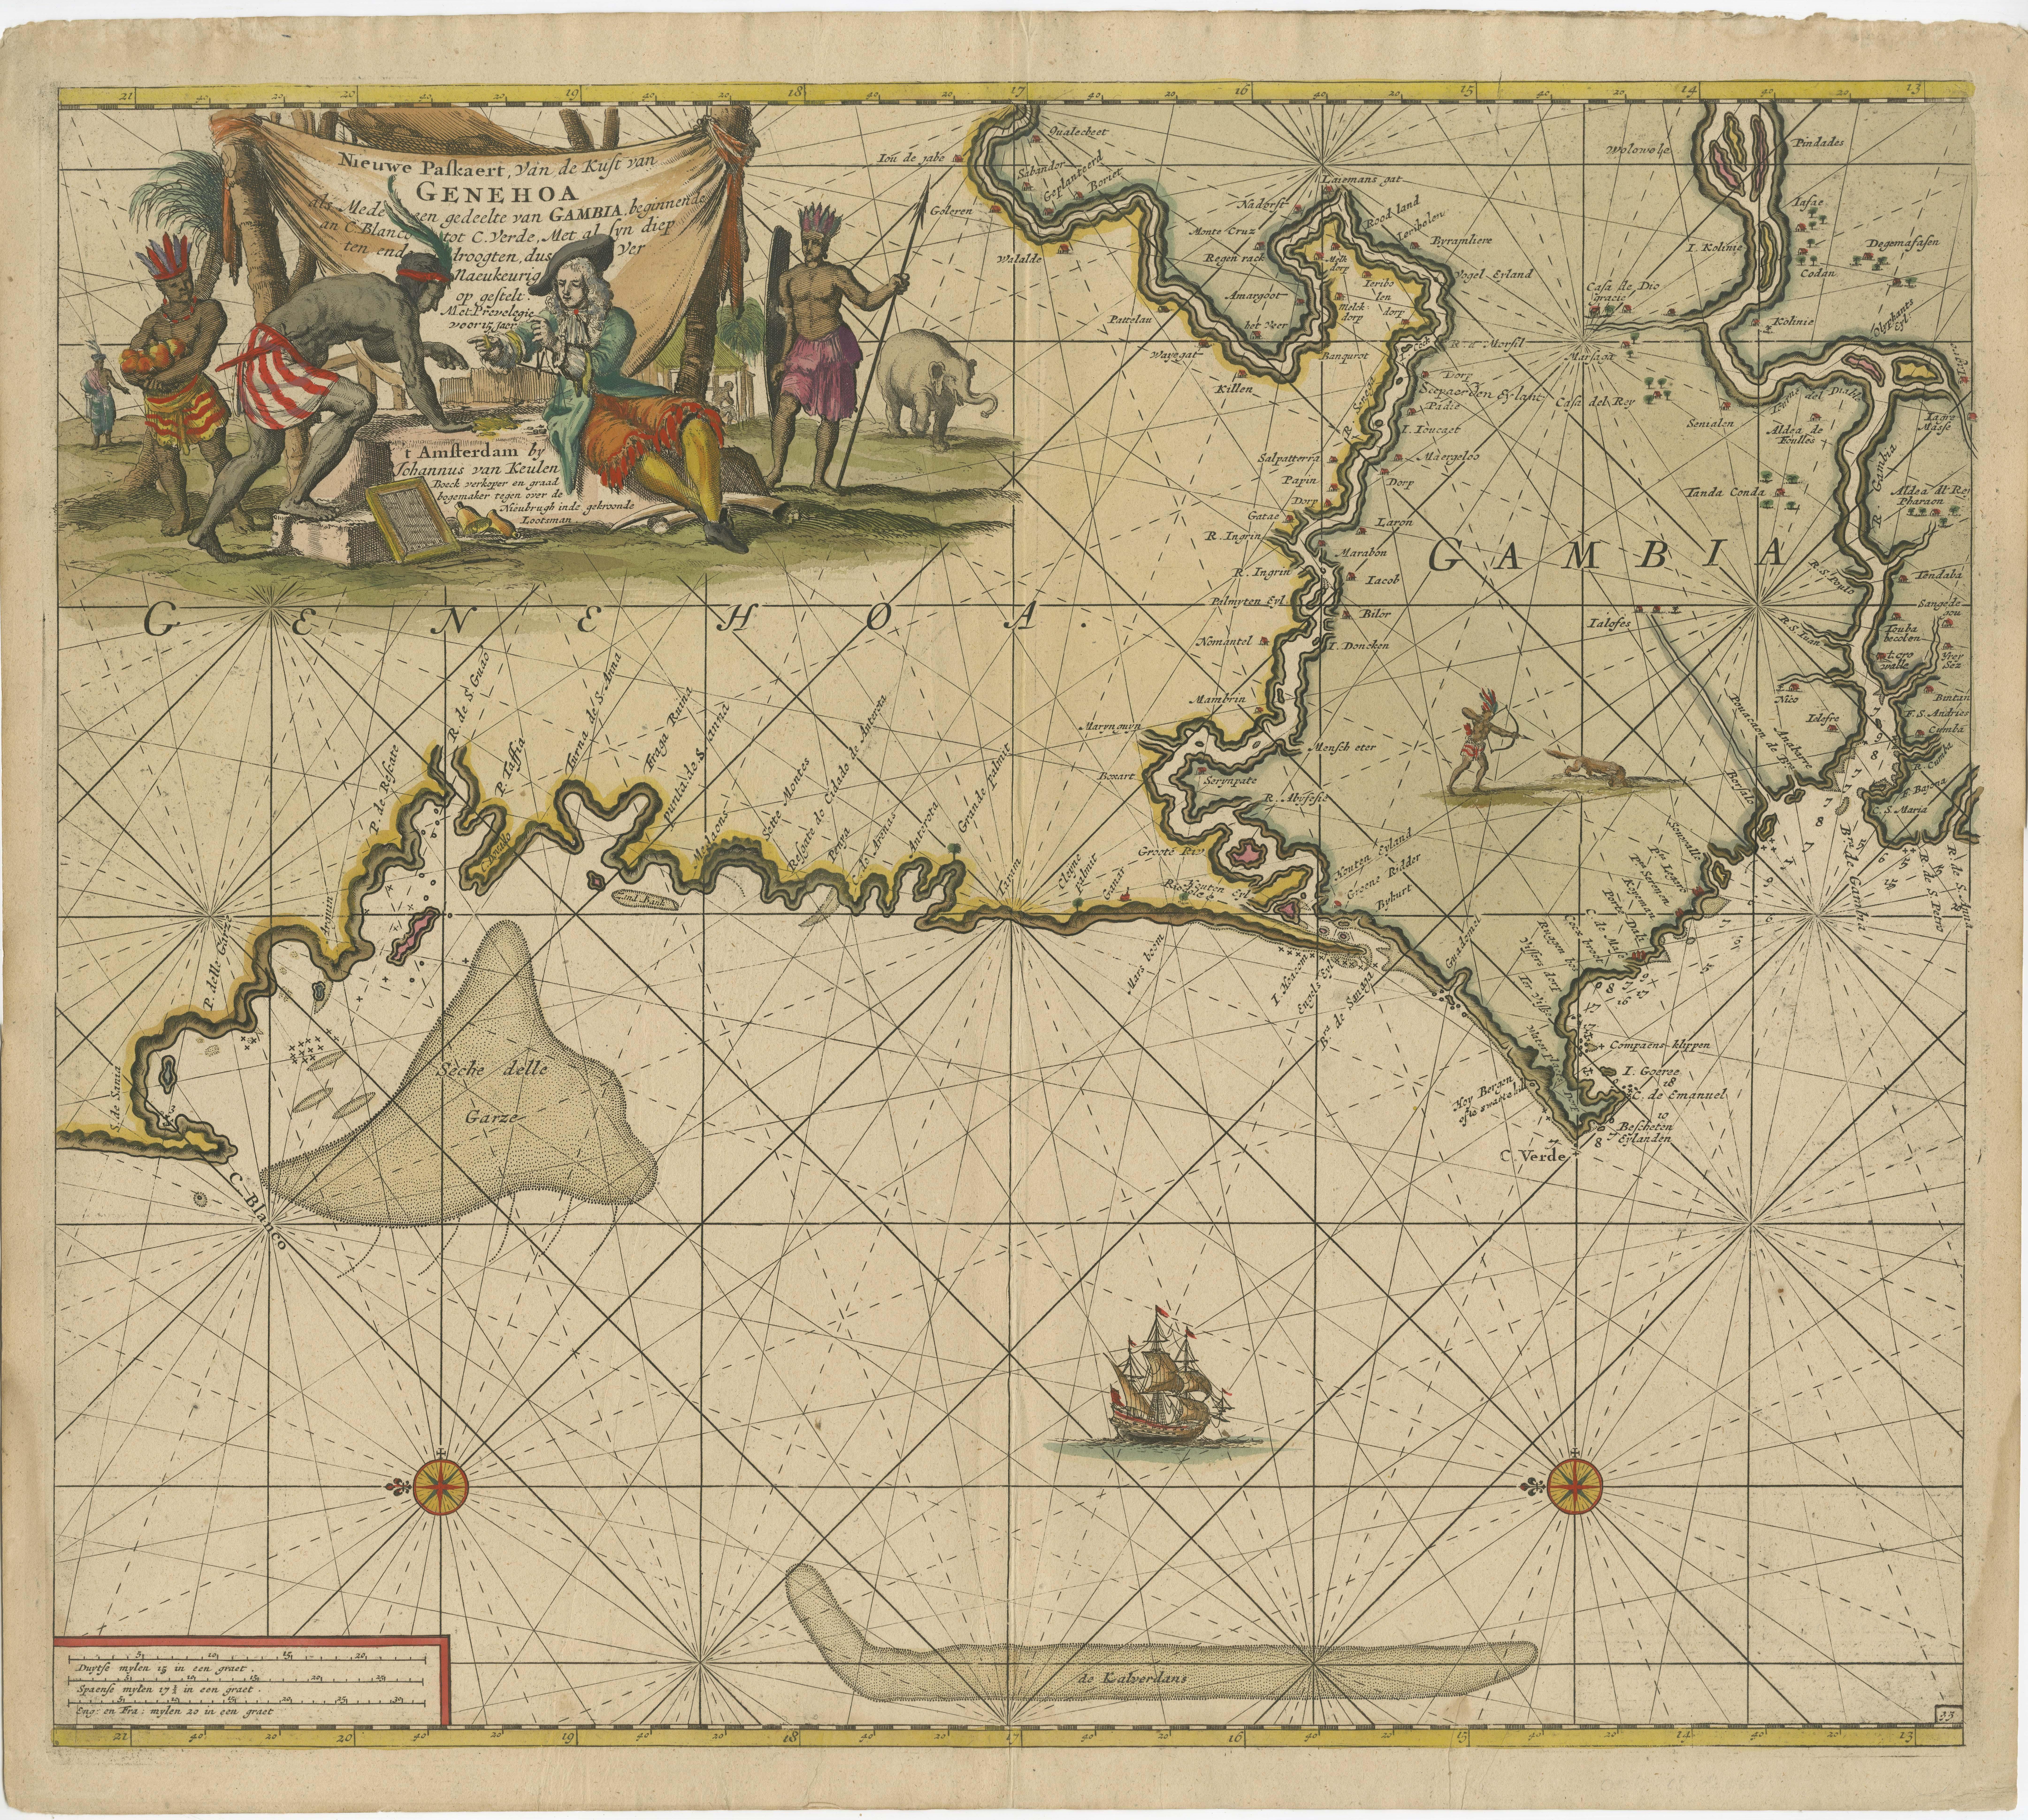 Antique map titled 'Nieuwe Paskaert van de Kust van Genehoa (..)'. This attractive sea chart covers the western coast of Africa from Cape Blanco (Ras Nouadhibou) to Cape Verde (Dakar) and beyond. The chart depicts the interior course of both the